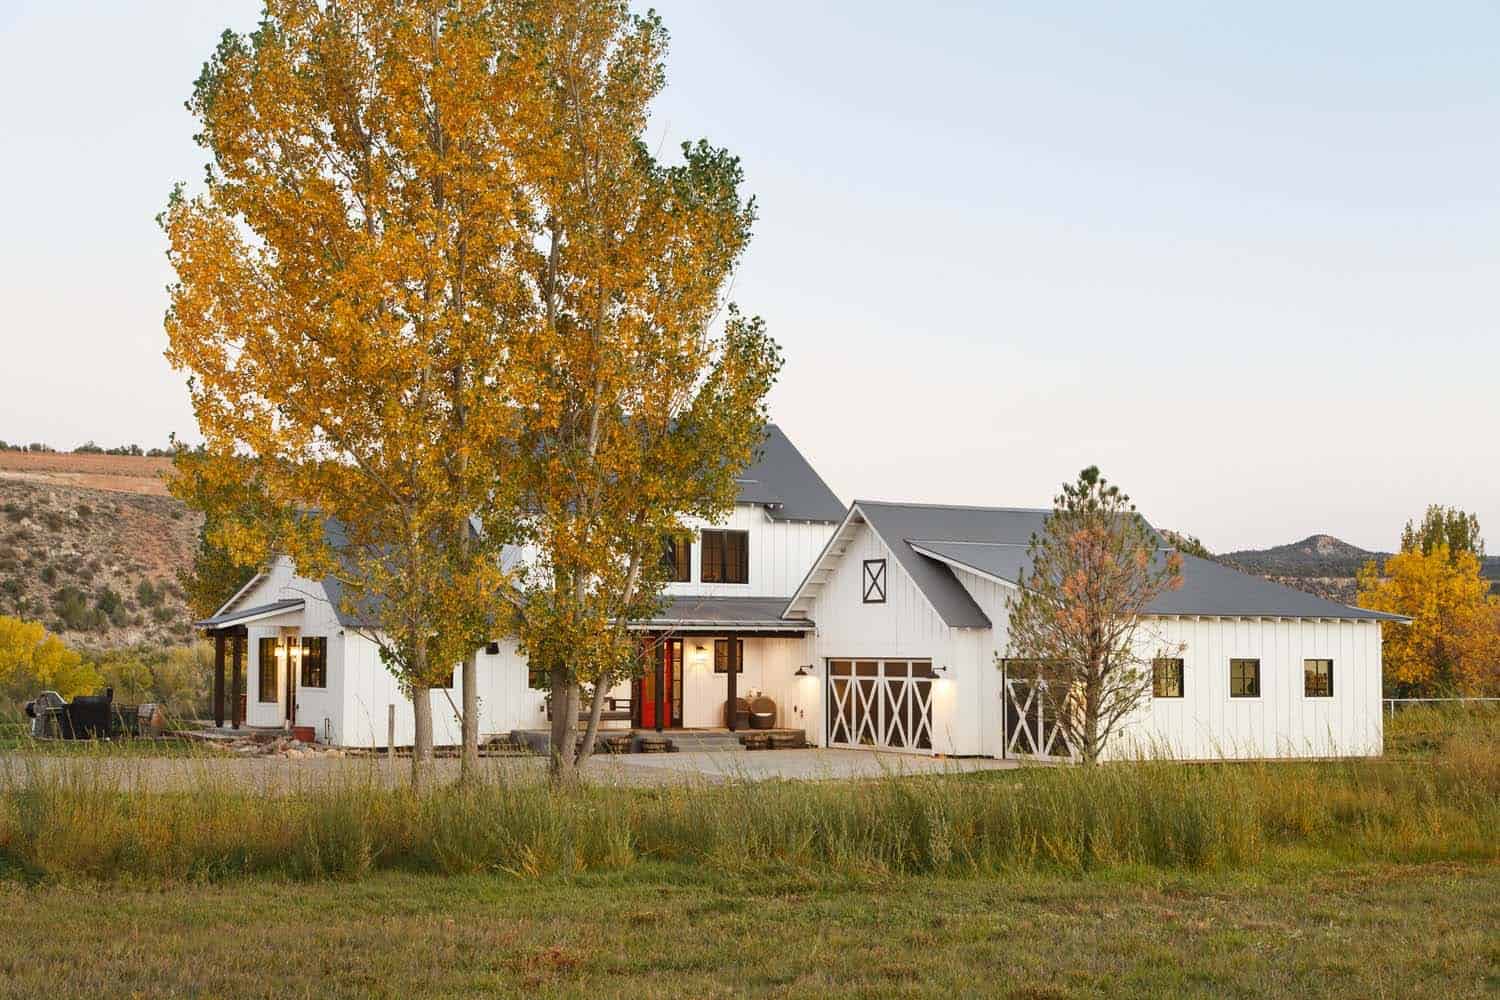 See this cozy and inviting modern farmhouse in the Colorado mountains